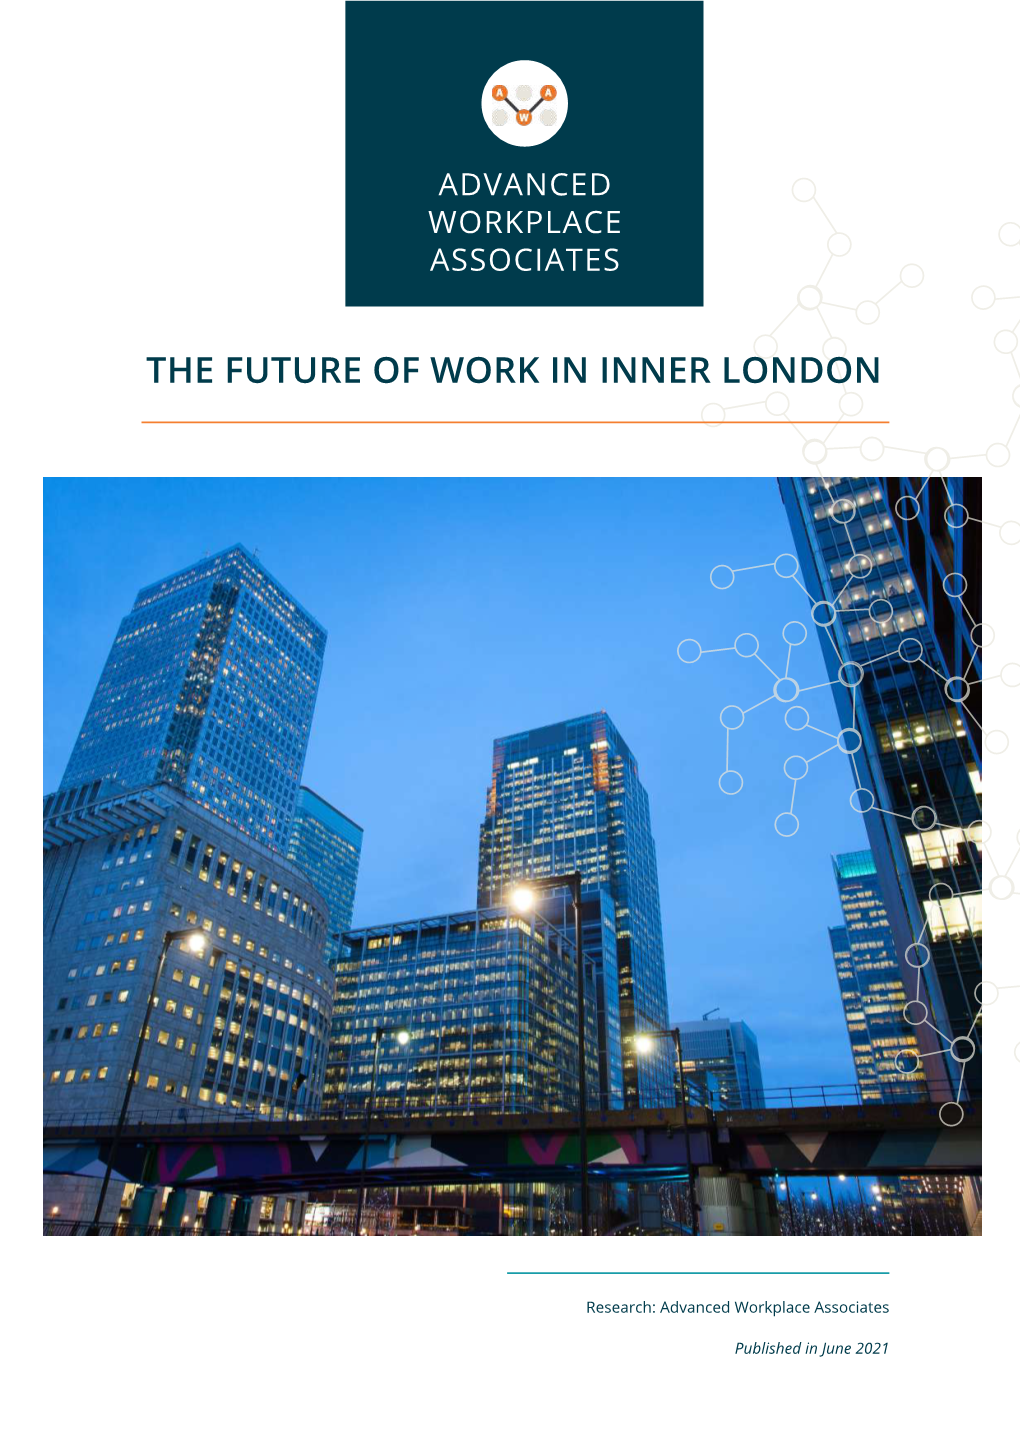 The Future of Work in Inner London